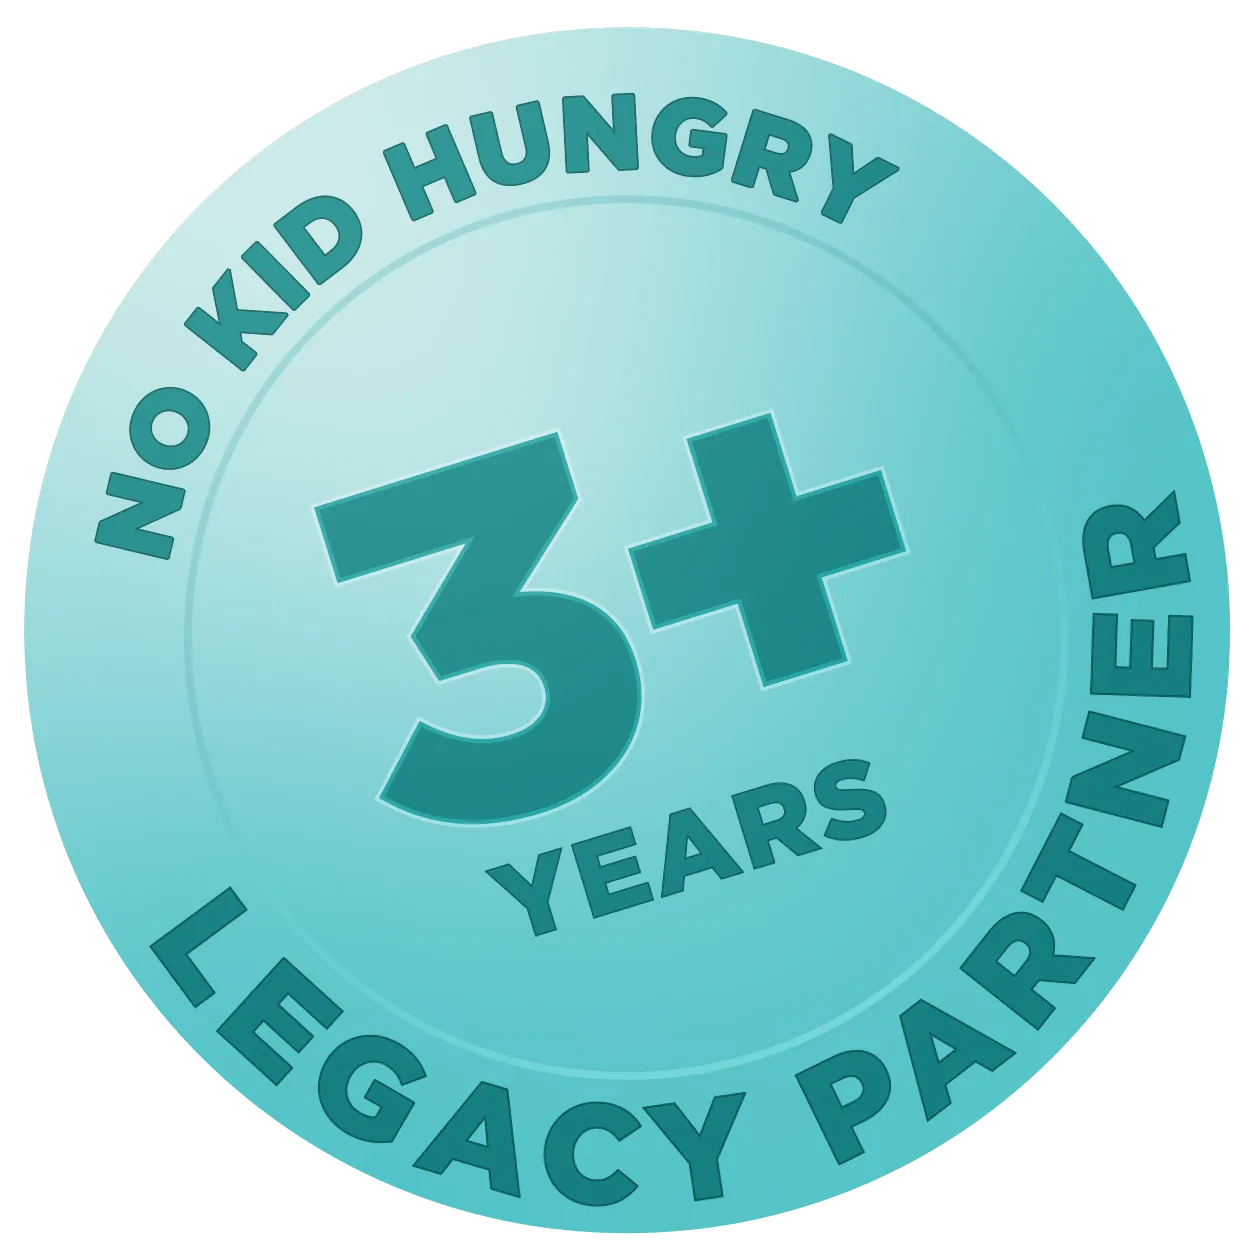 A badge certifying 3 years as a No Kid Hungry Partner